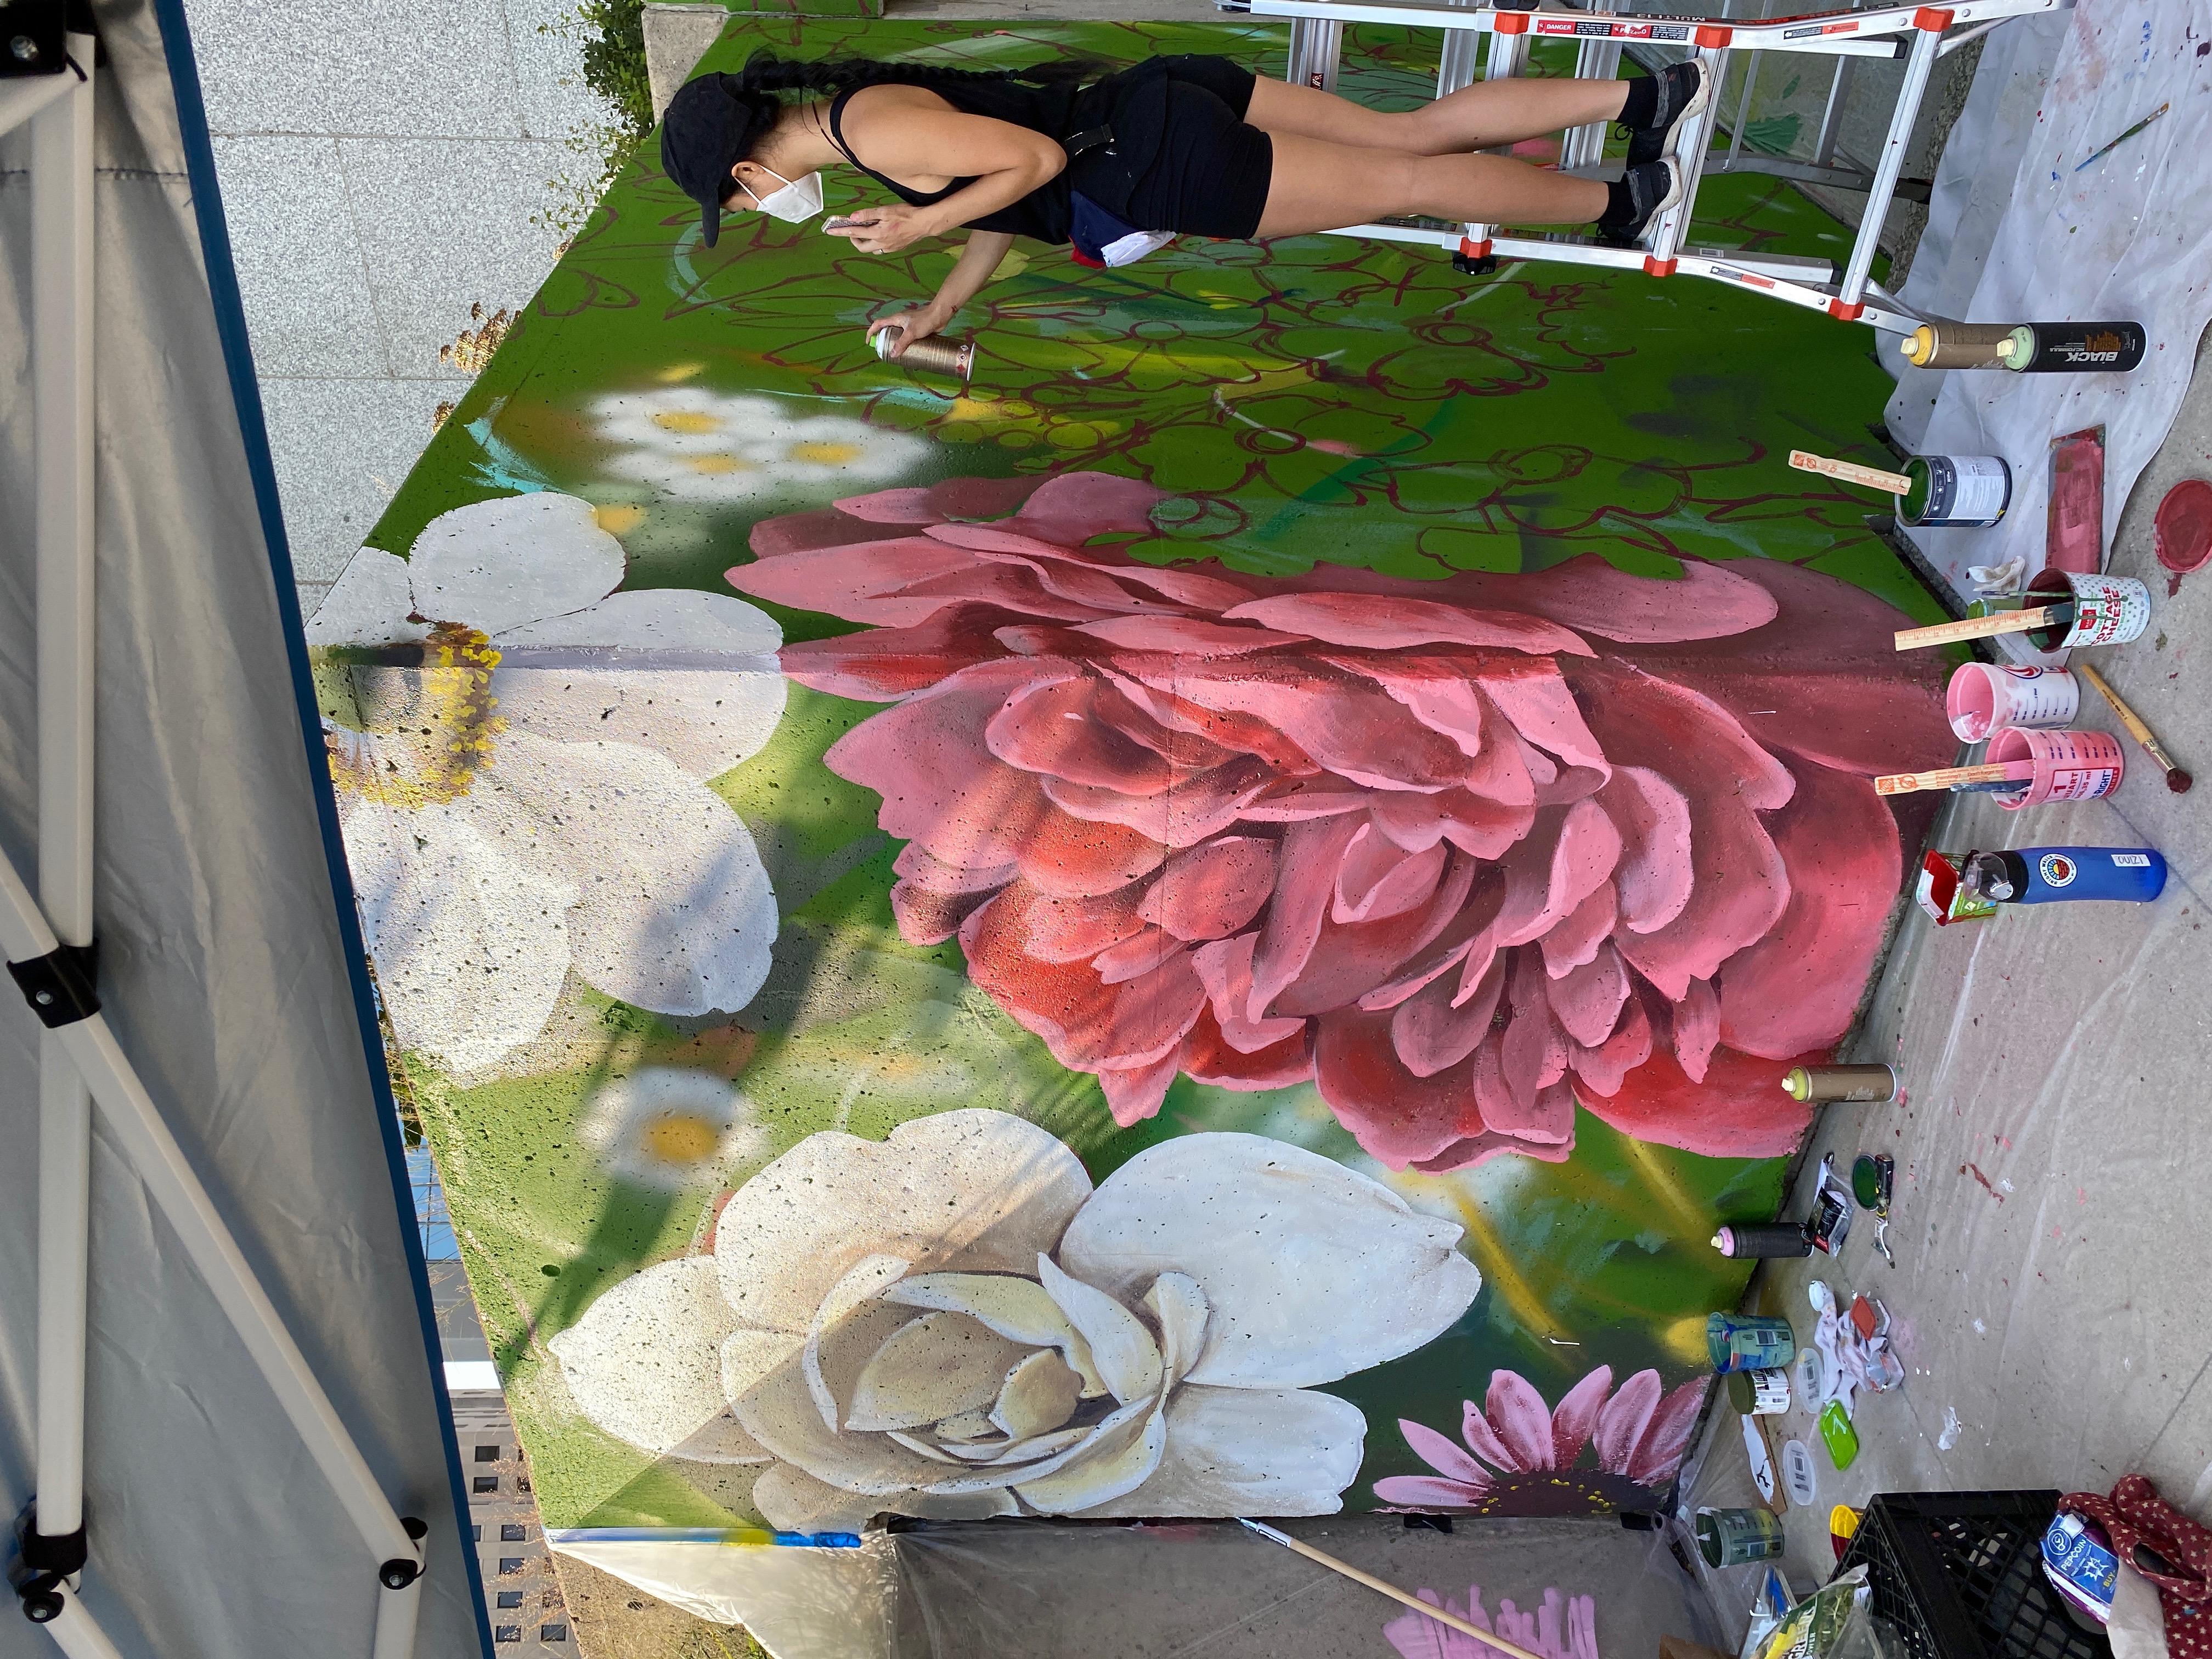 Local artist Louise Jones works on a mural. Photo courtesy of Crystal Phelps